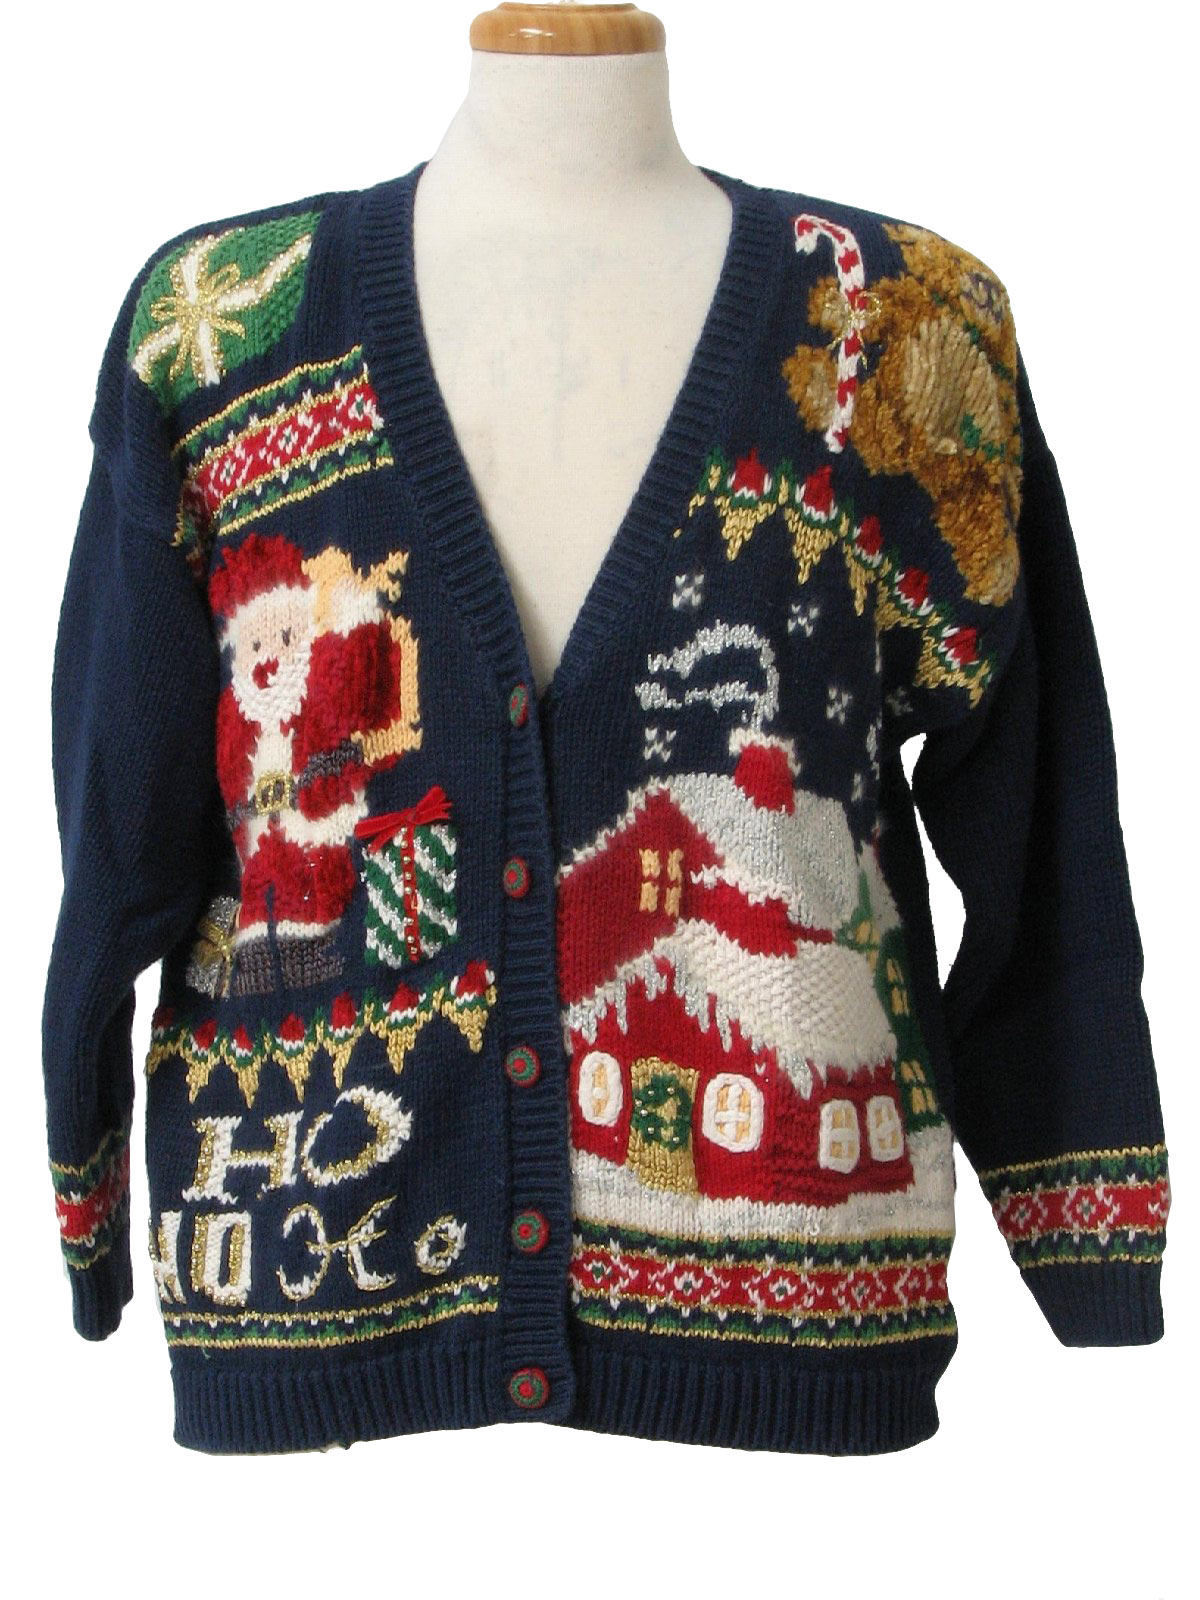 Ugly Christmas Cardigan Sweater: -Heirloom Collectibles- Unisex dark ...